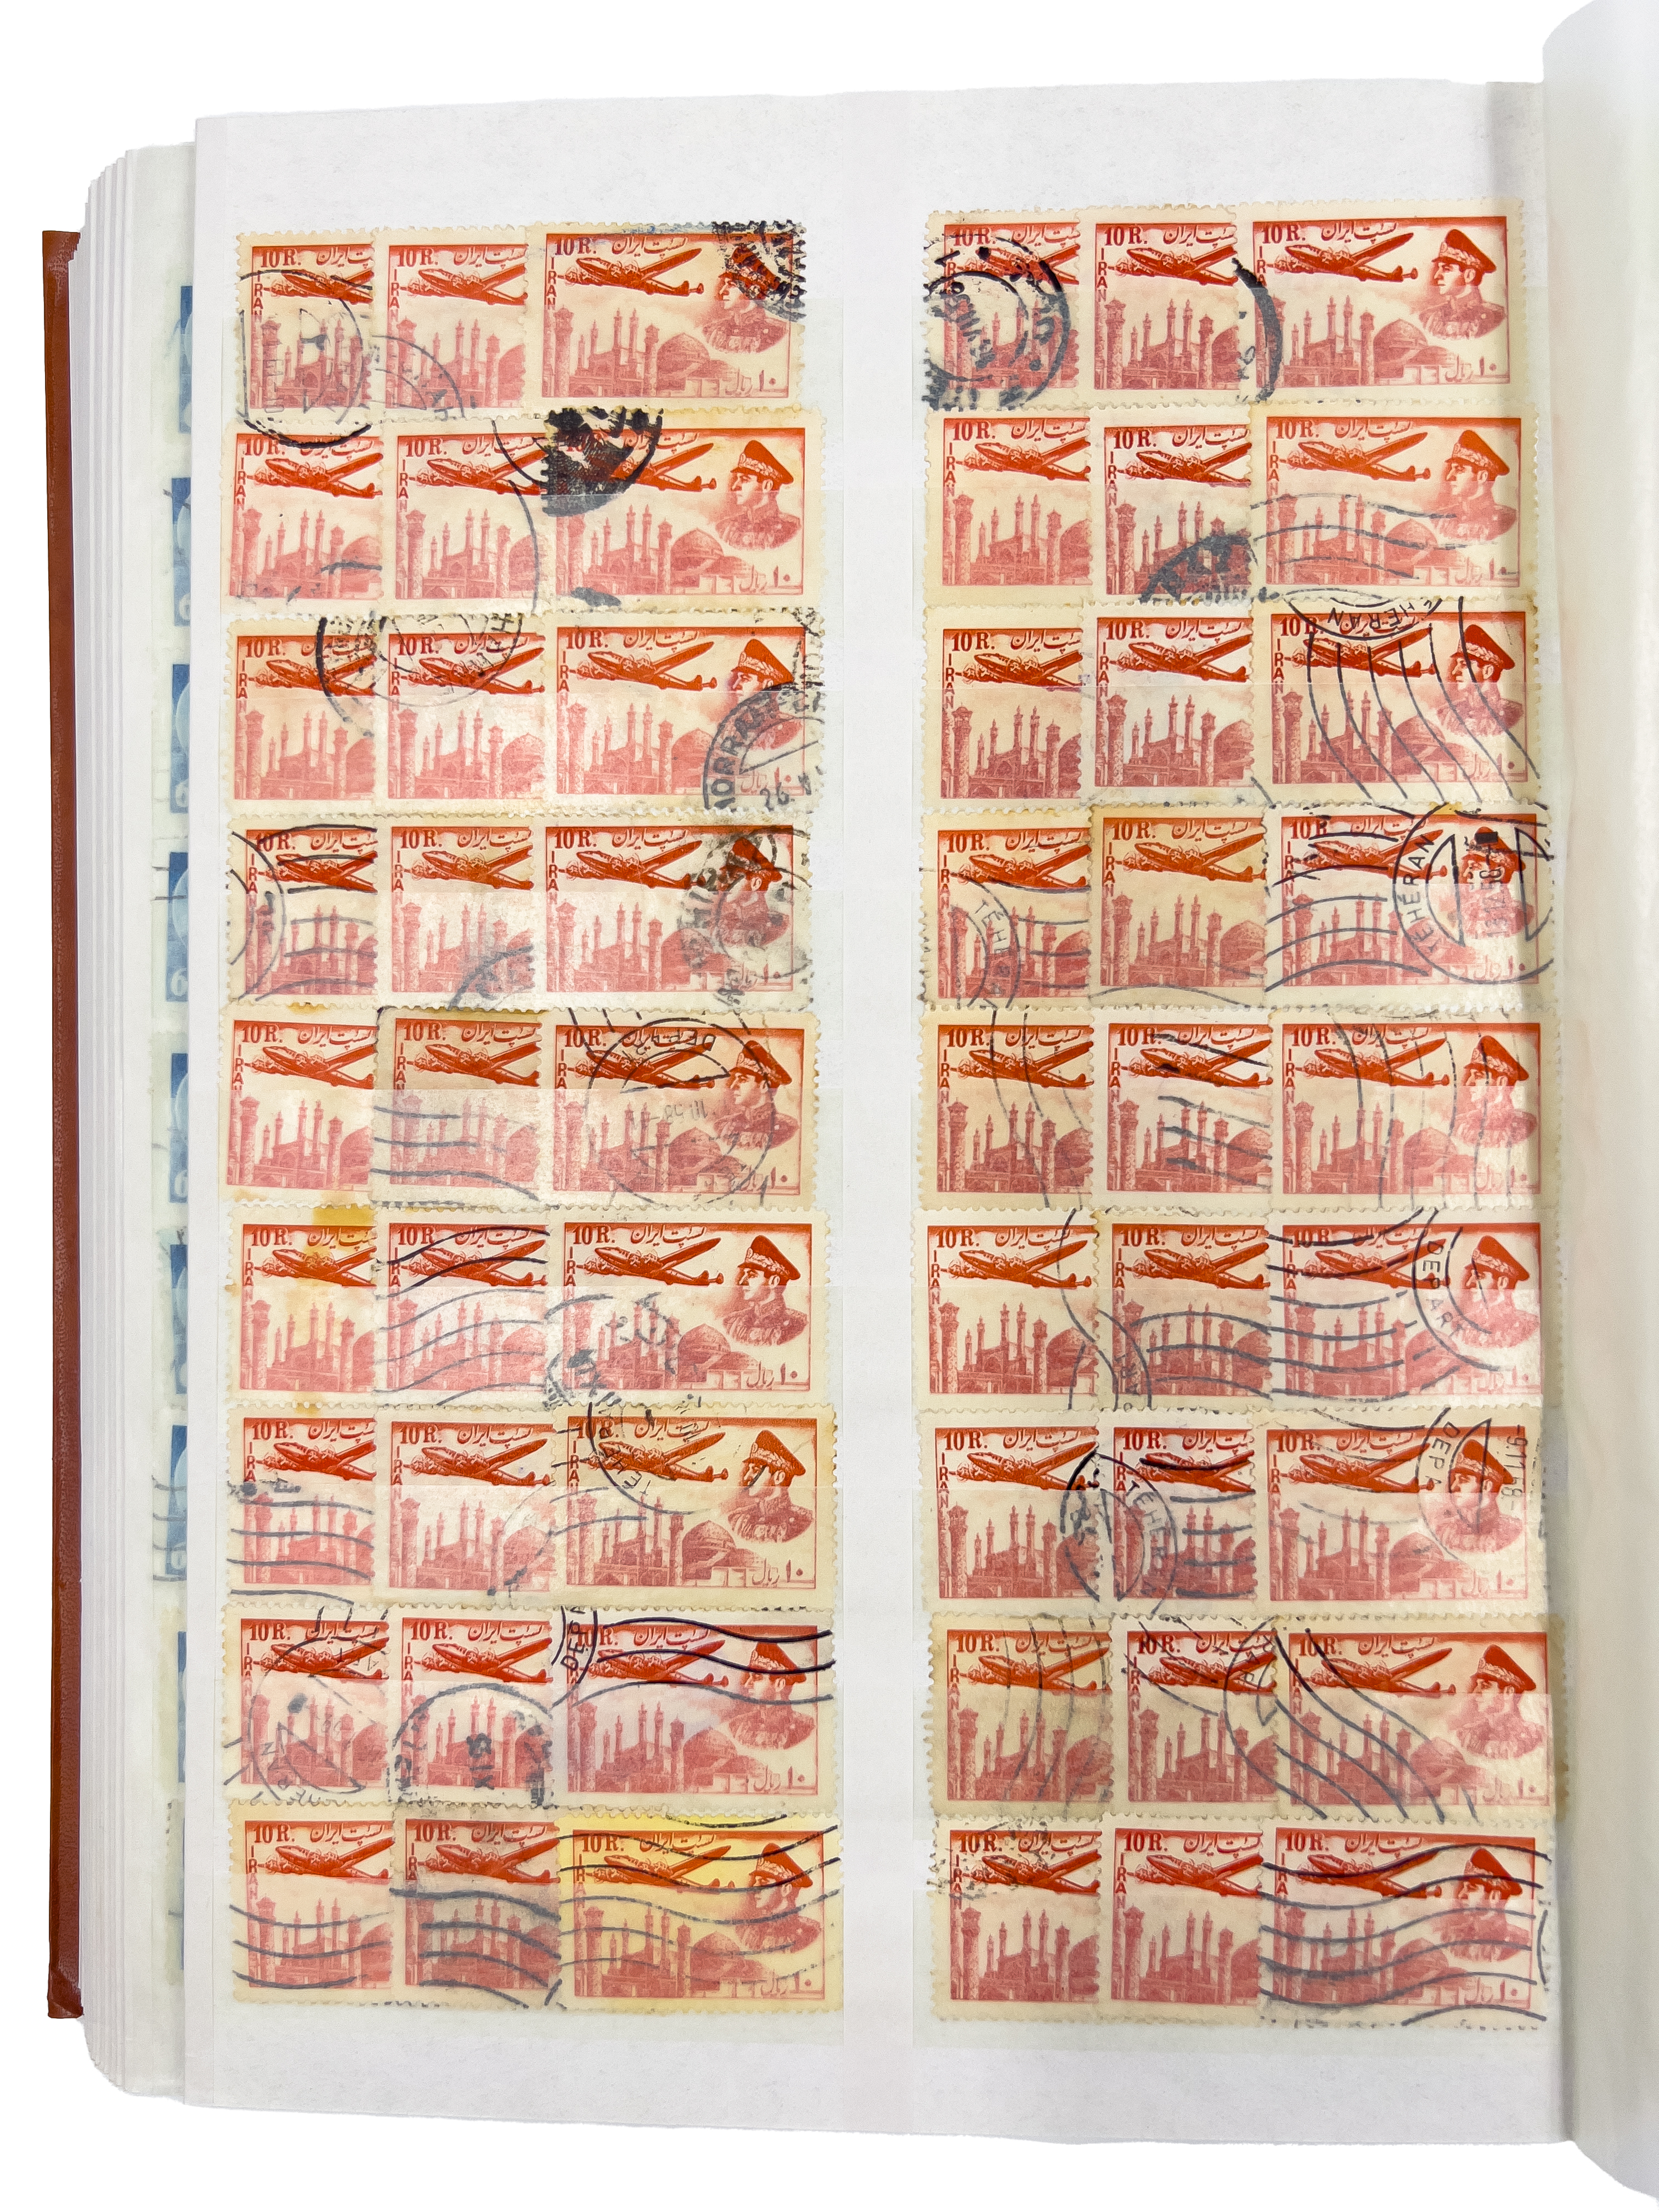 RARE & EXTENSIVE COLLECTION OF PERSIAN PAHLAVI POST STAMPS - Image 9 of 63